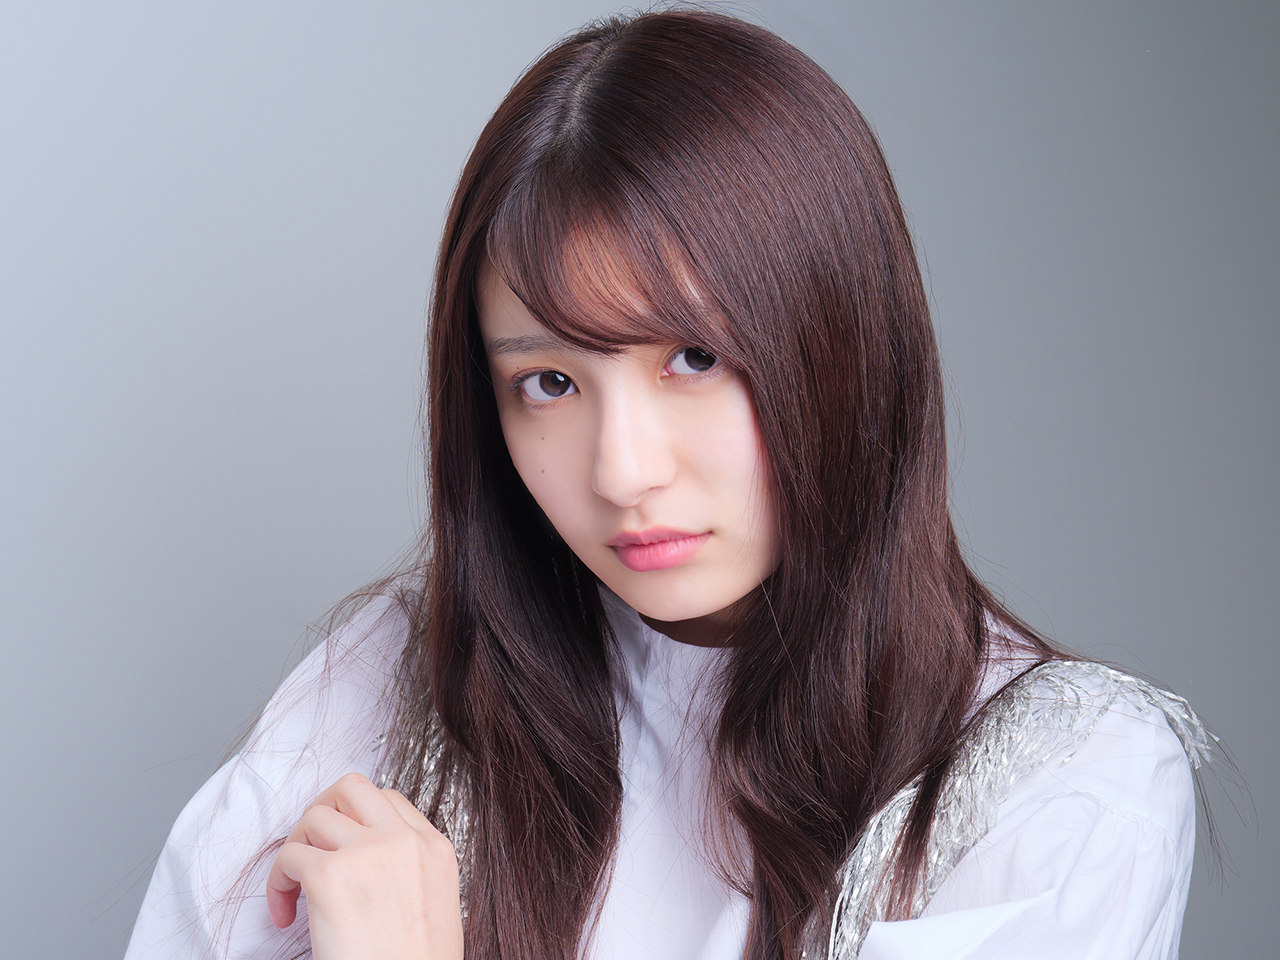 Pick Up Actress 吉川愛 Hustle Press Official Web Site